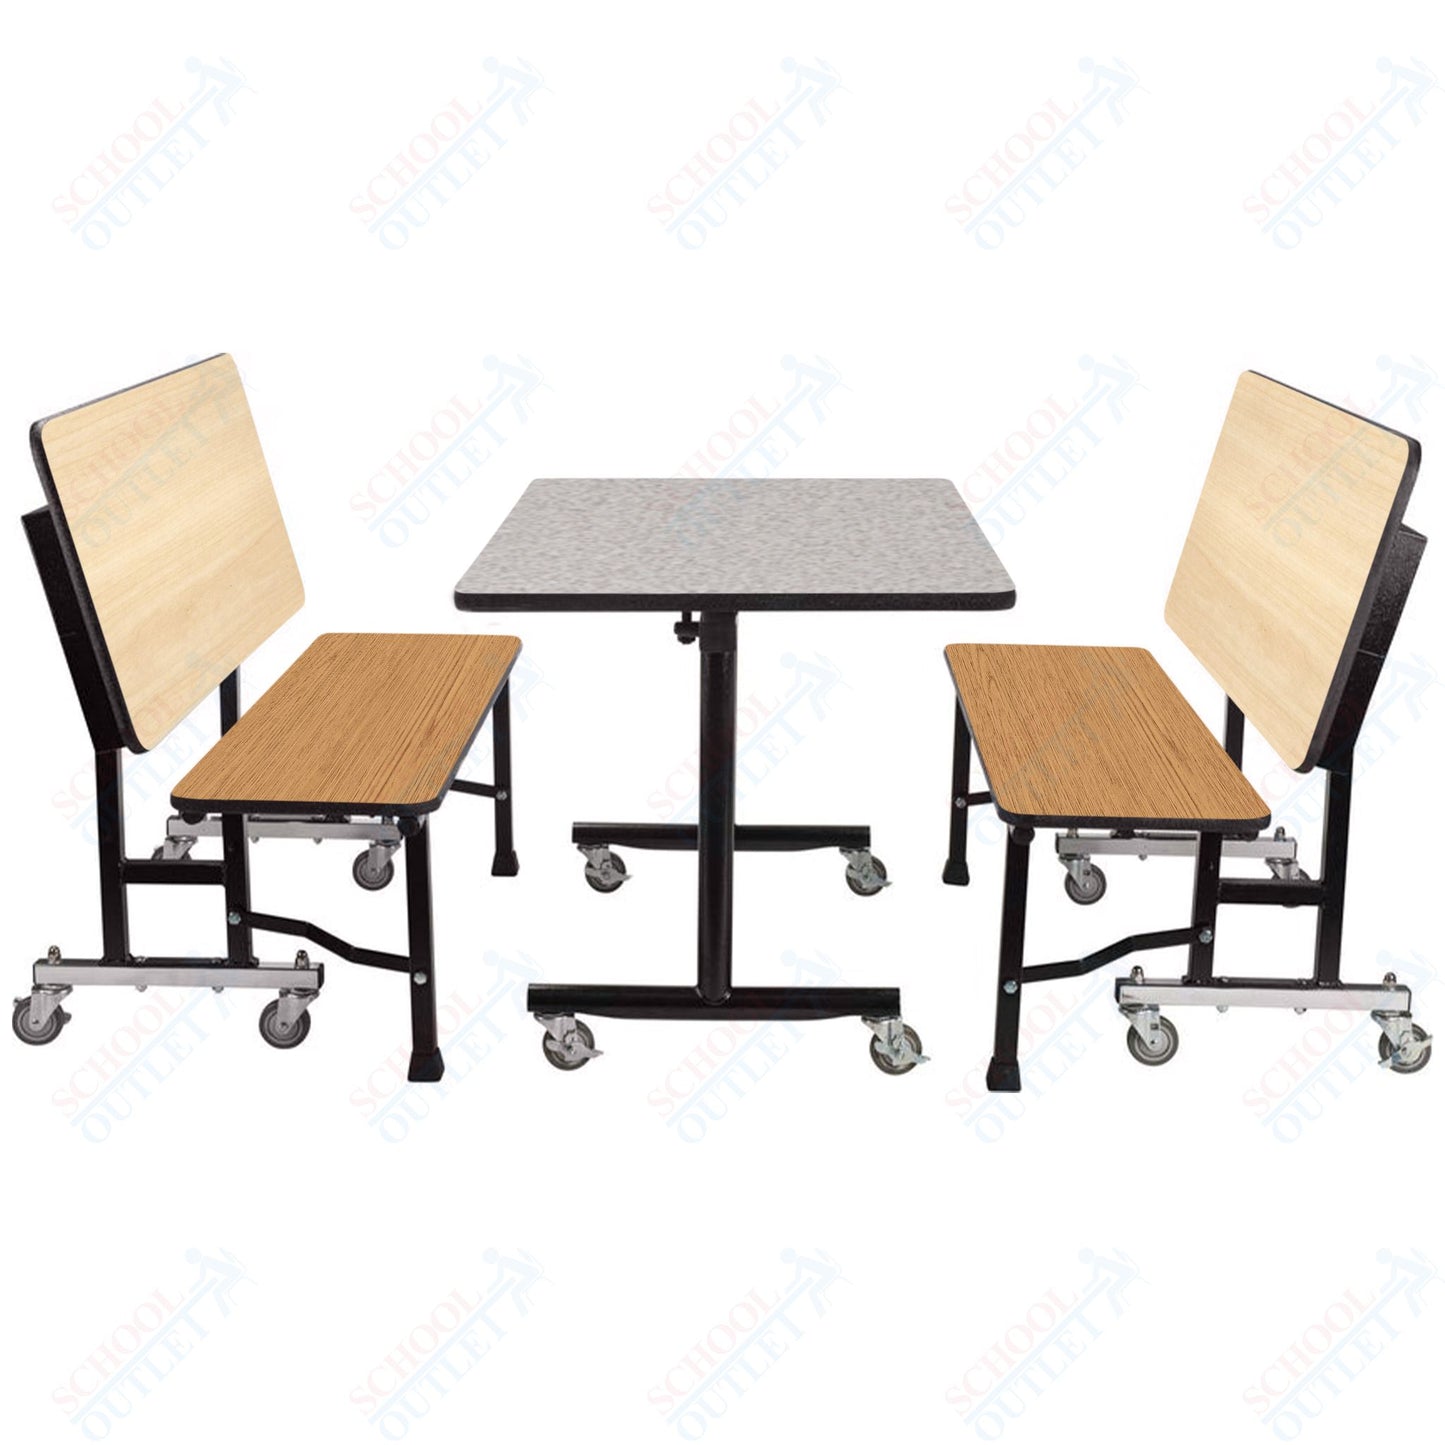 NPS ToGo Booth Set, (1) 30"x60" Table and (2) 60" Benches, Particleboard Core (National Public Seating NPS-TGBTH3060PBTM)